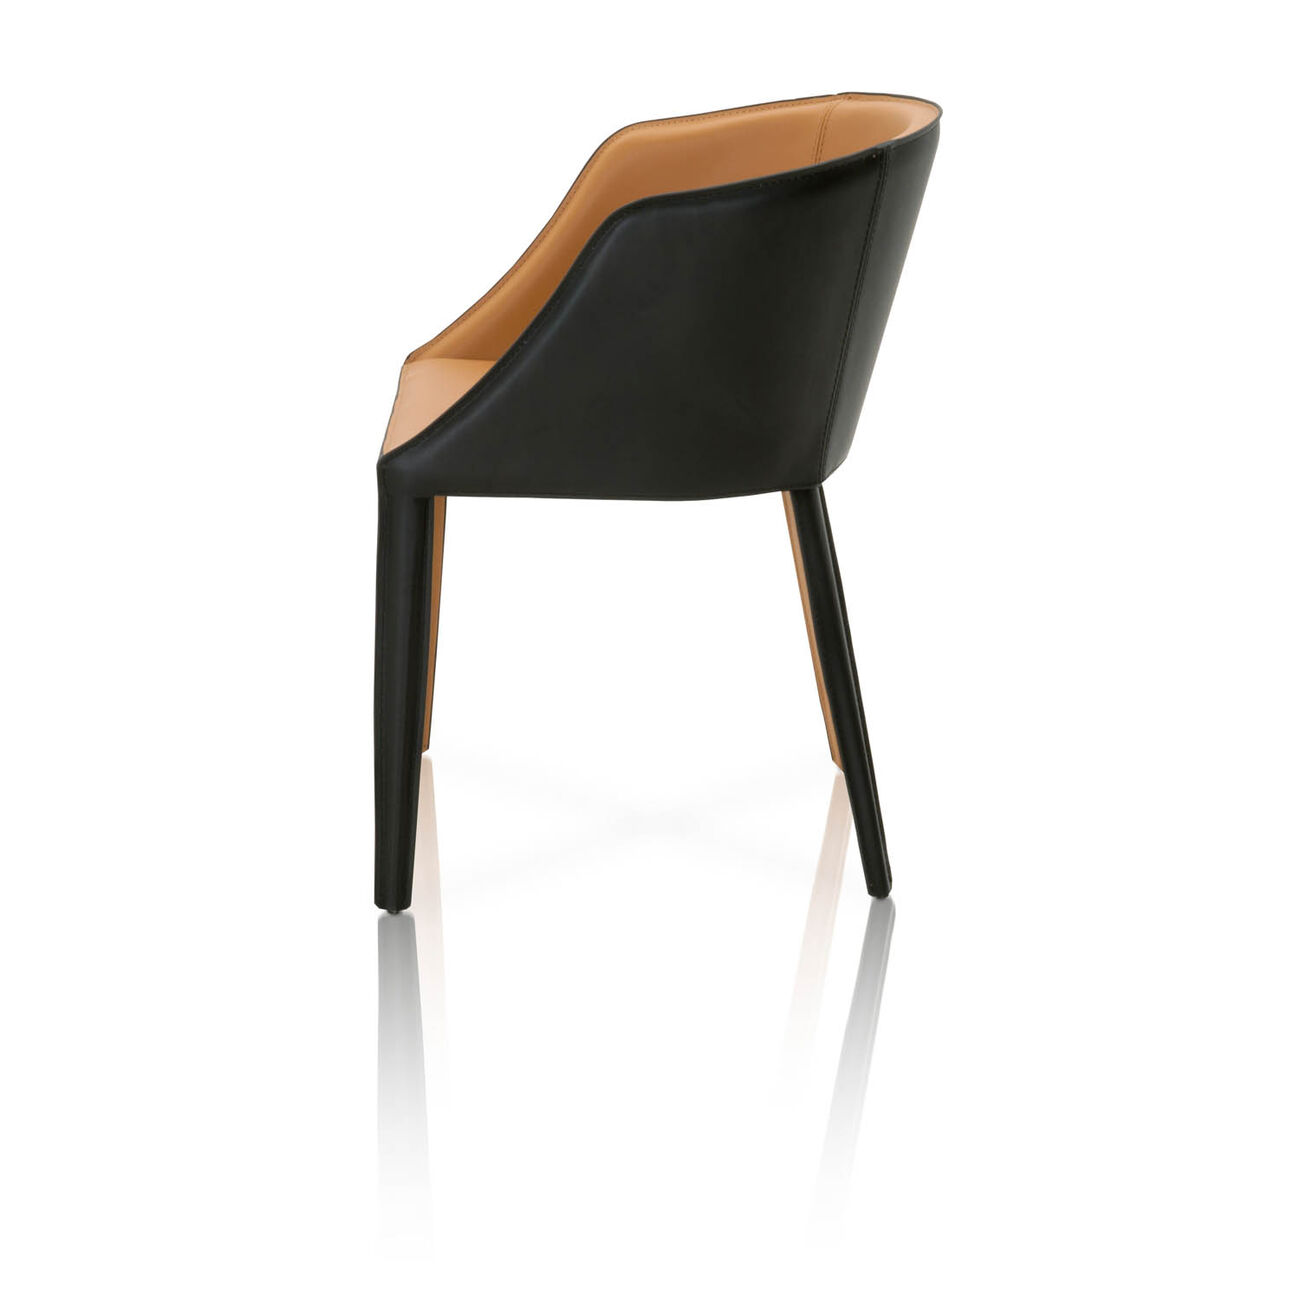 Dual-Tone Dining Chair With Curved Back Saddle Brown And Black